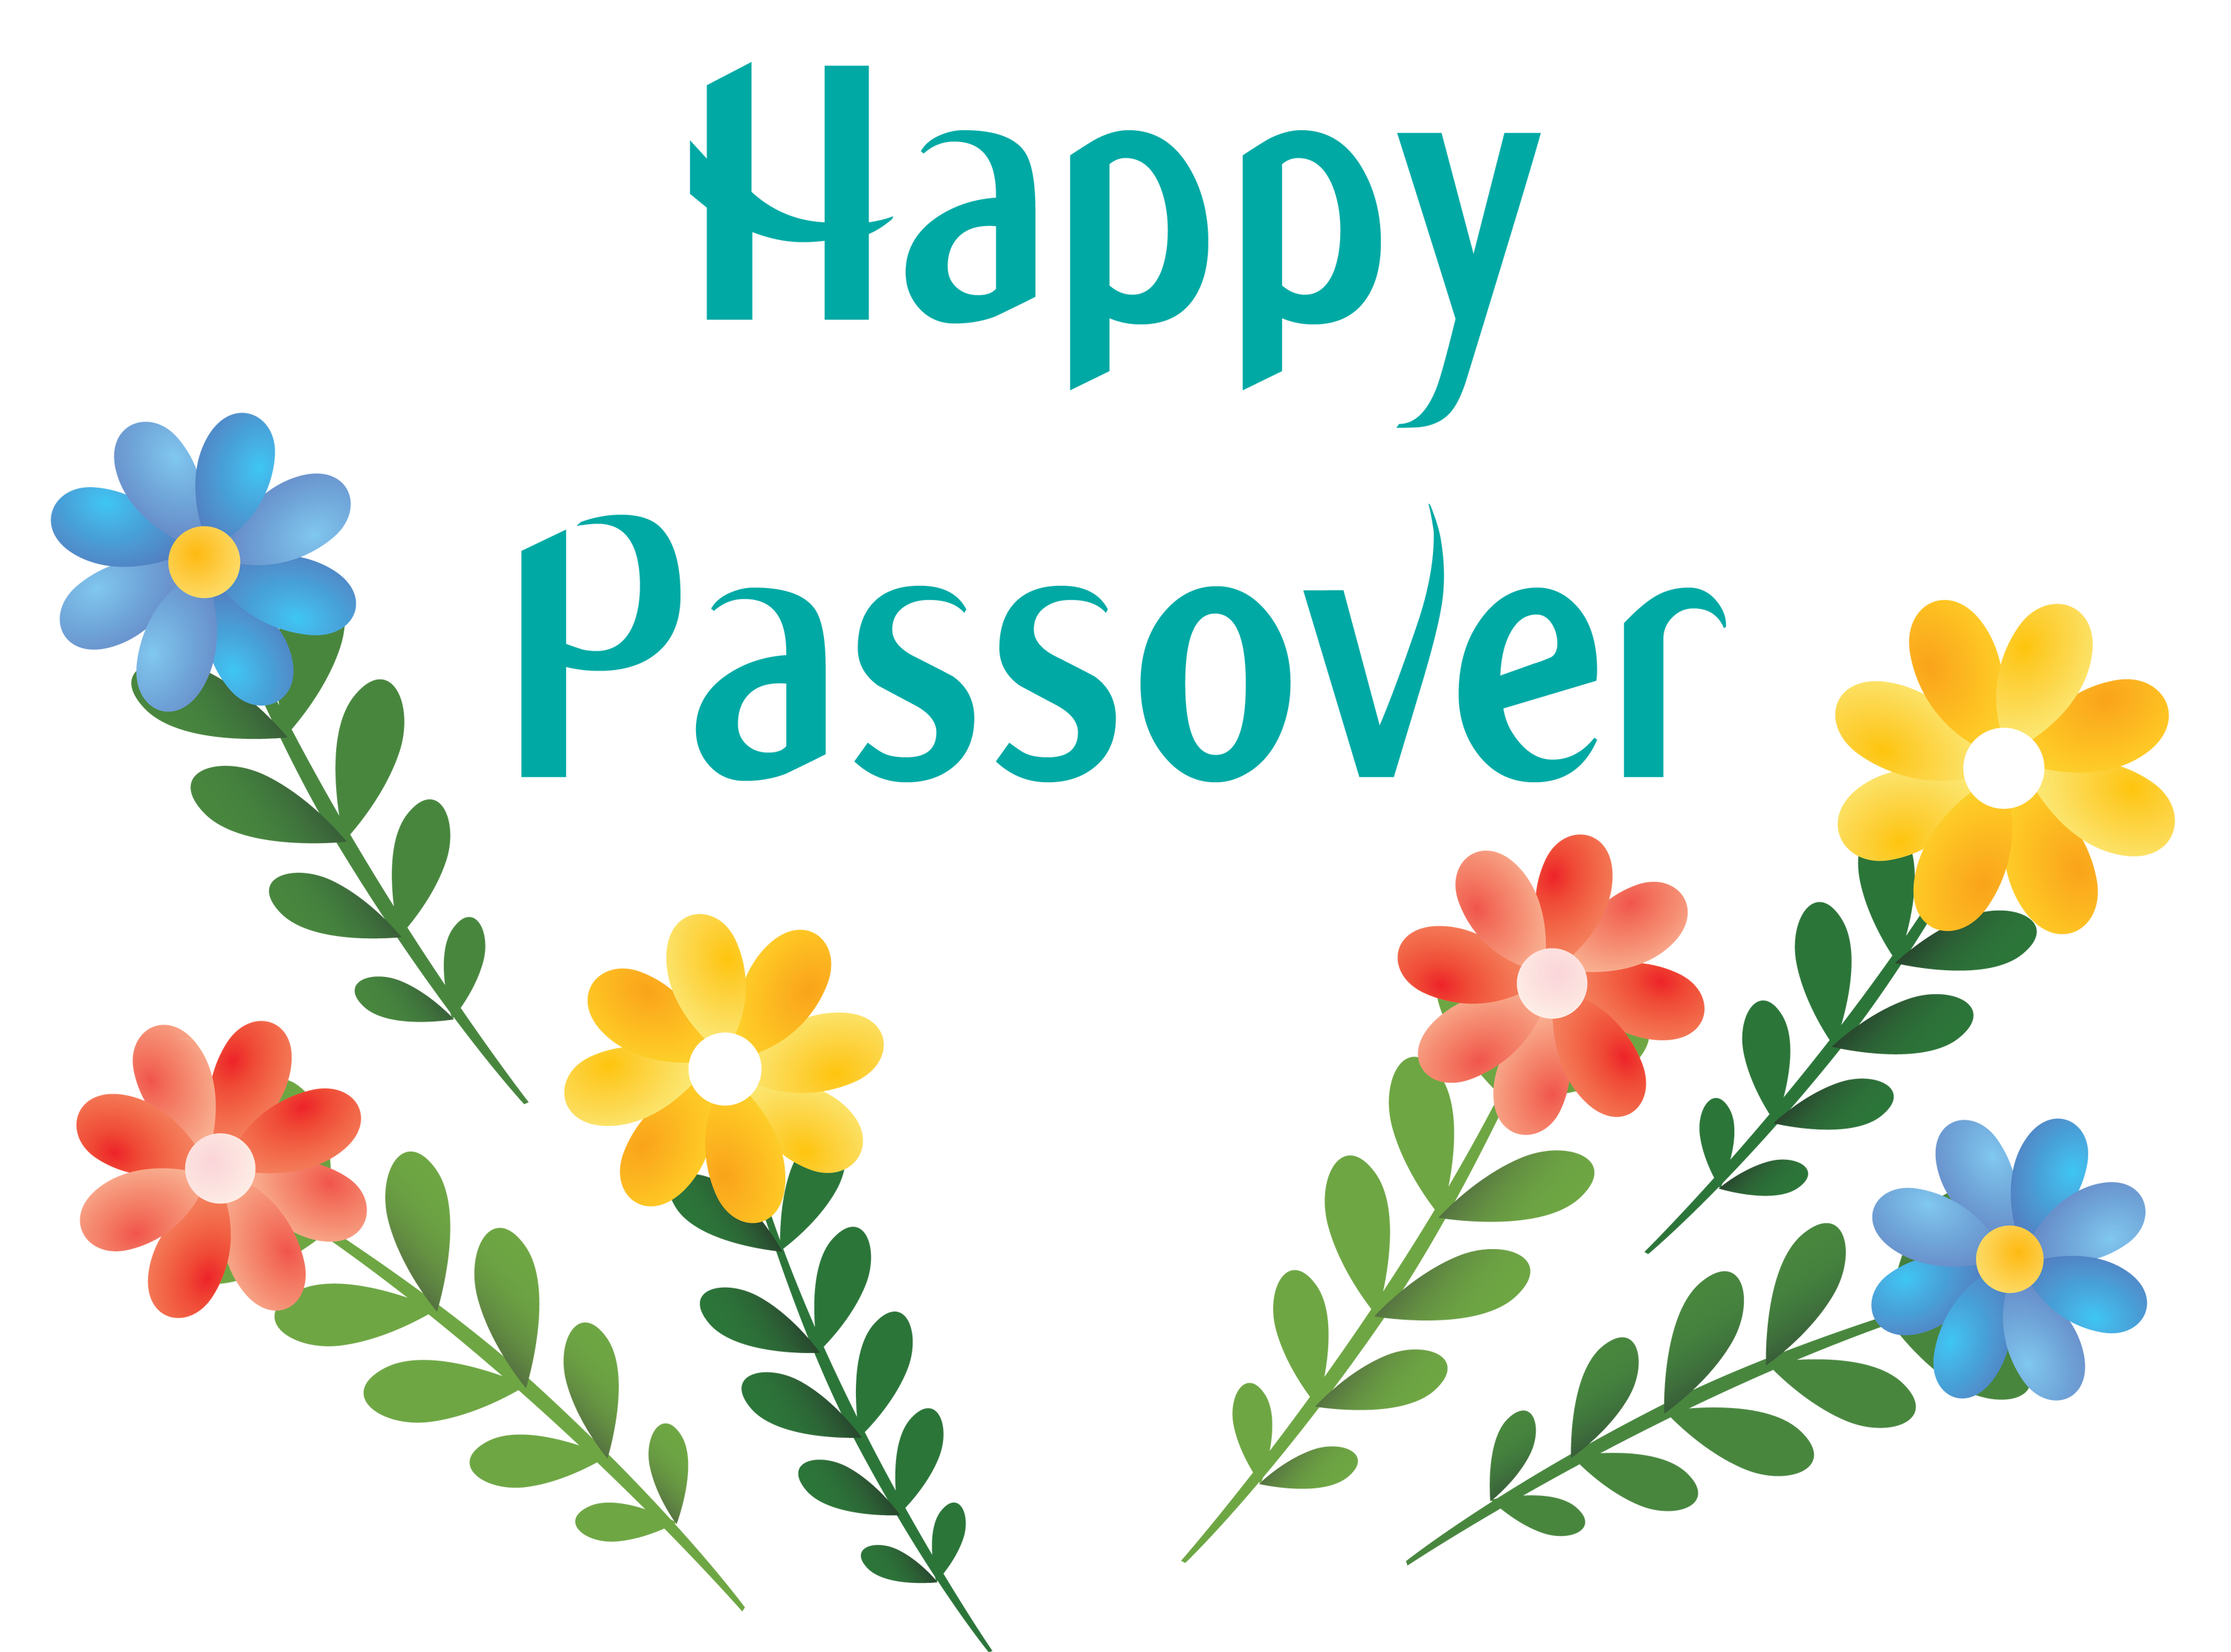 Happy Passover PNG Image Transparent Background